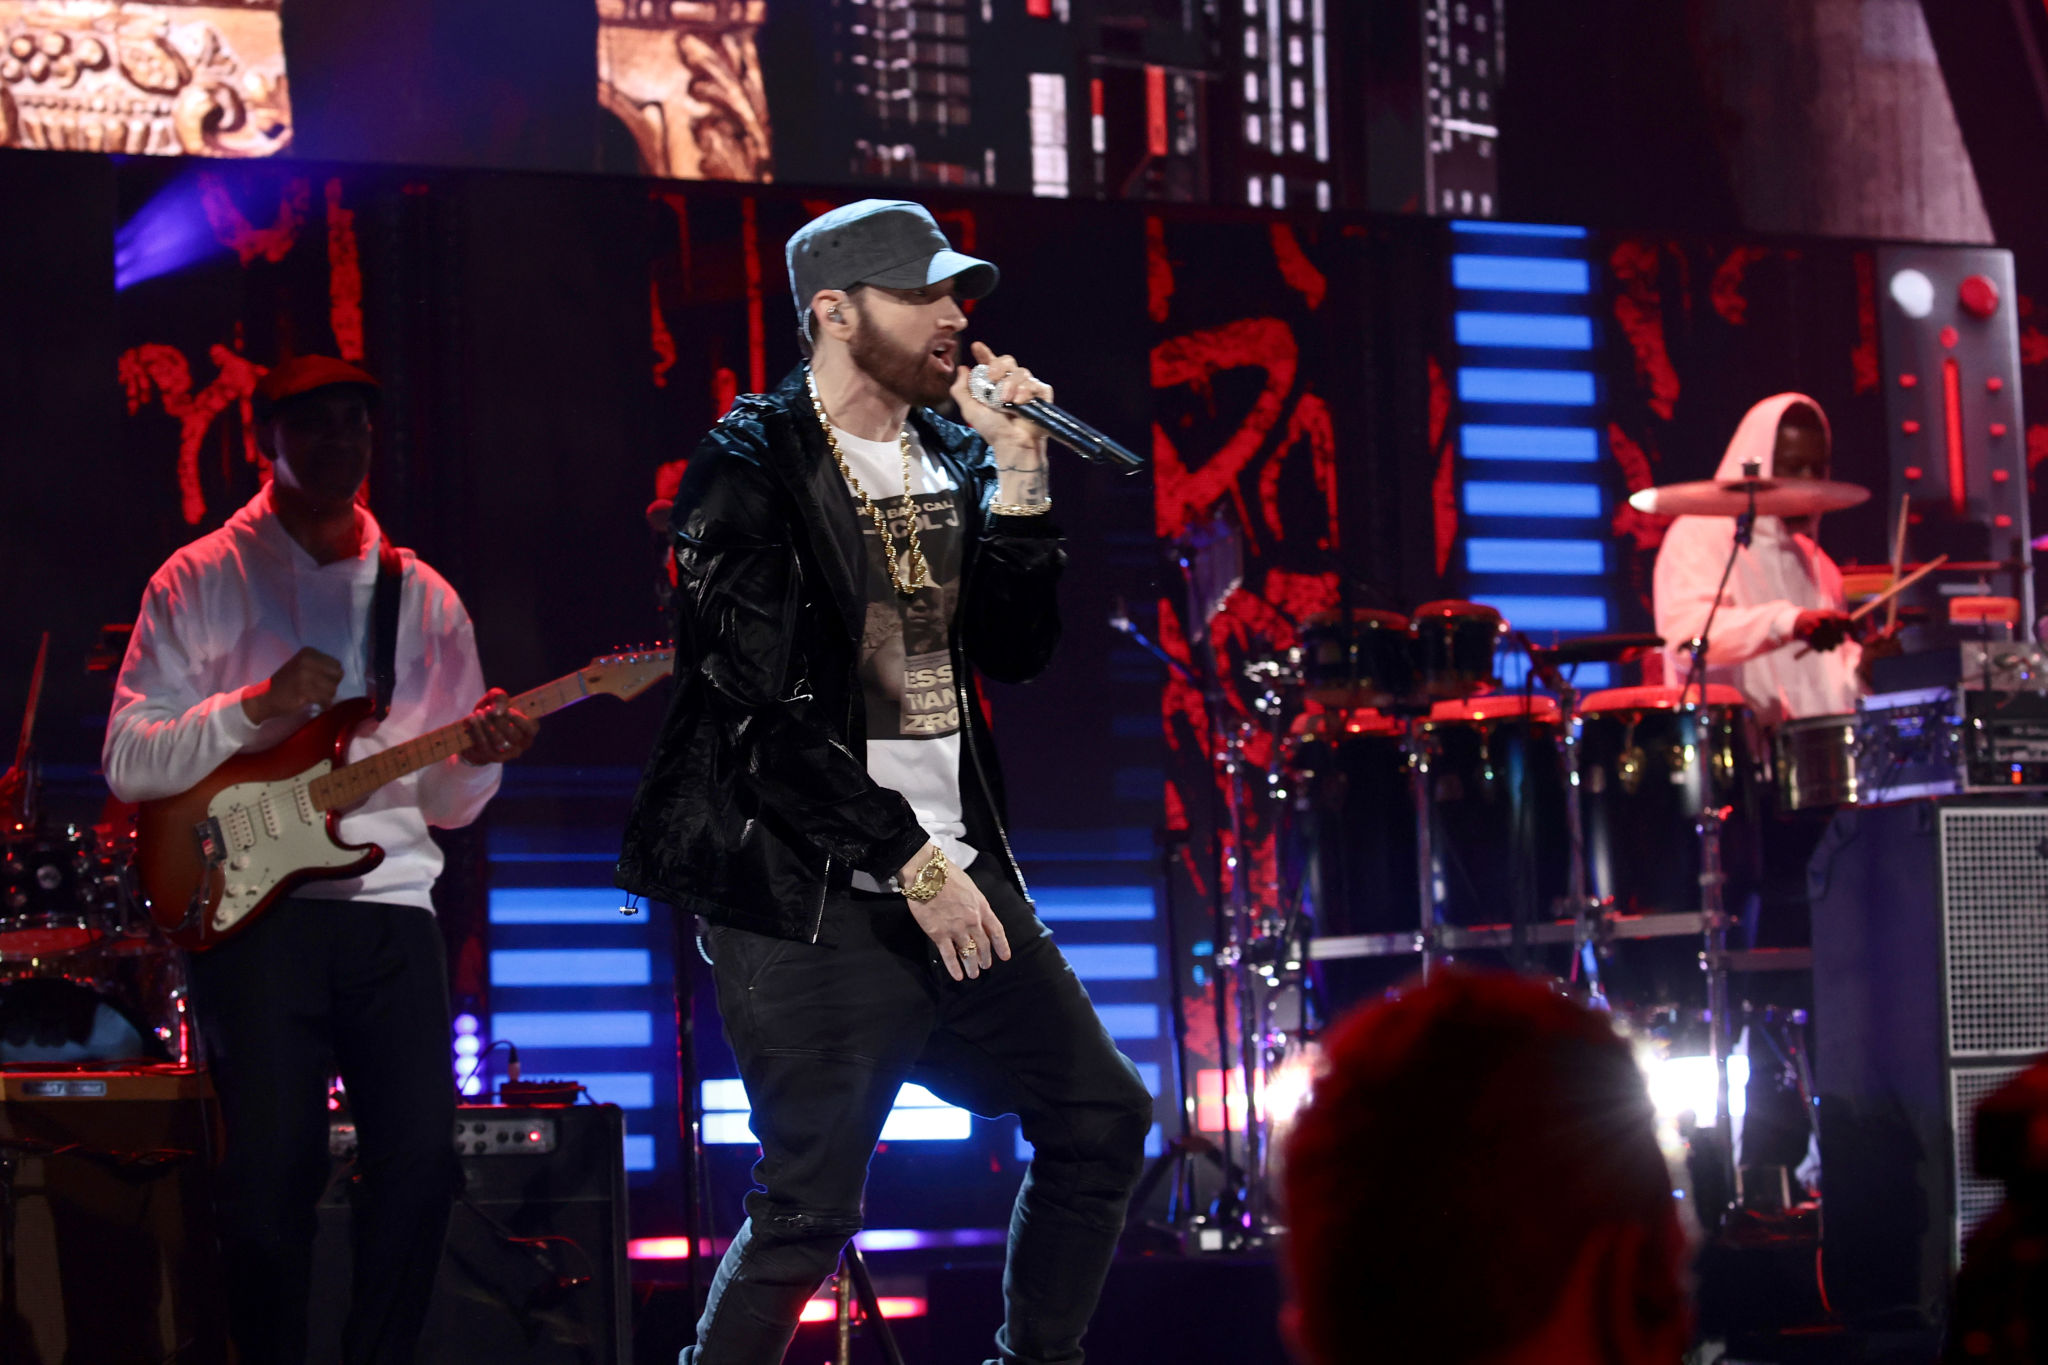 CLEVELAND, OHIO - OCTOBER 30: Eminem performs onstage during the 36th Annual Rock & Roll Hall Of Fame Induction Ceremony at Rocket Mortgage Fieldhouse on October 30, 2021 in Cleveland, Ohio. (Photo by Dimitrios Kambouris/Getty Images for The Rock and Roll Hall of Fame )